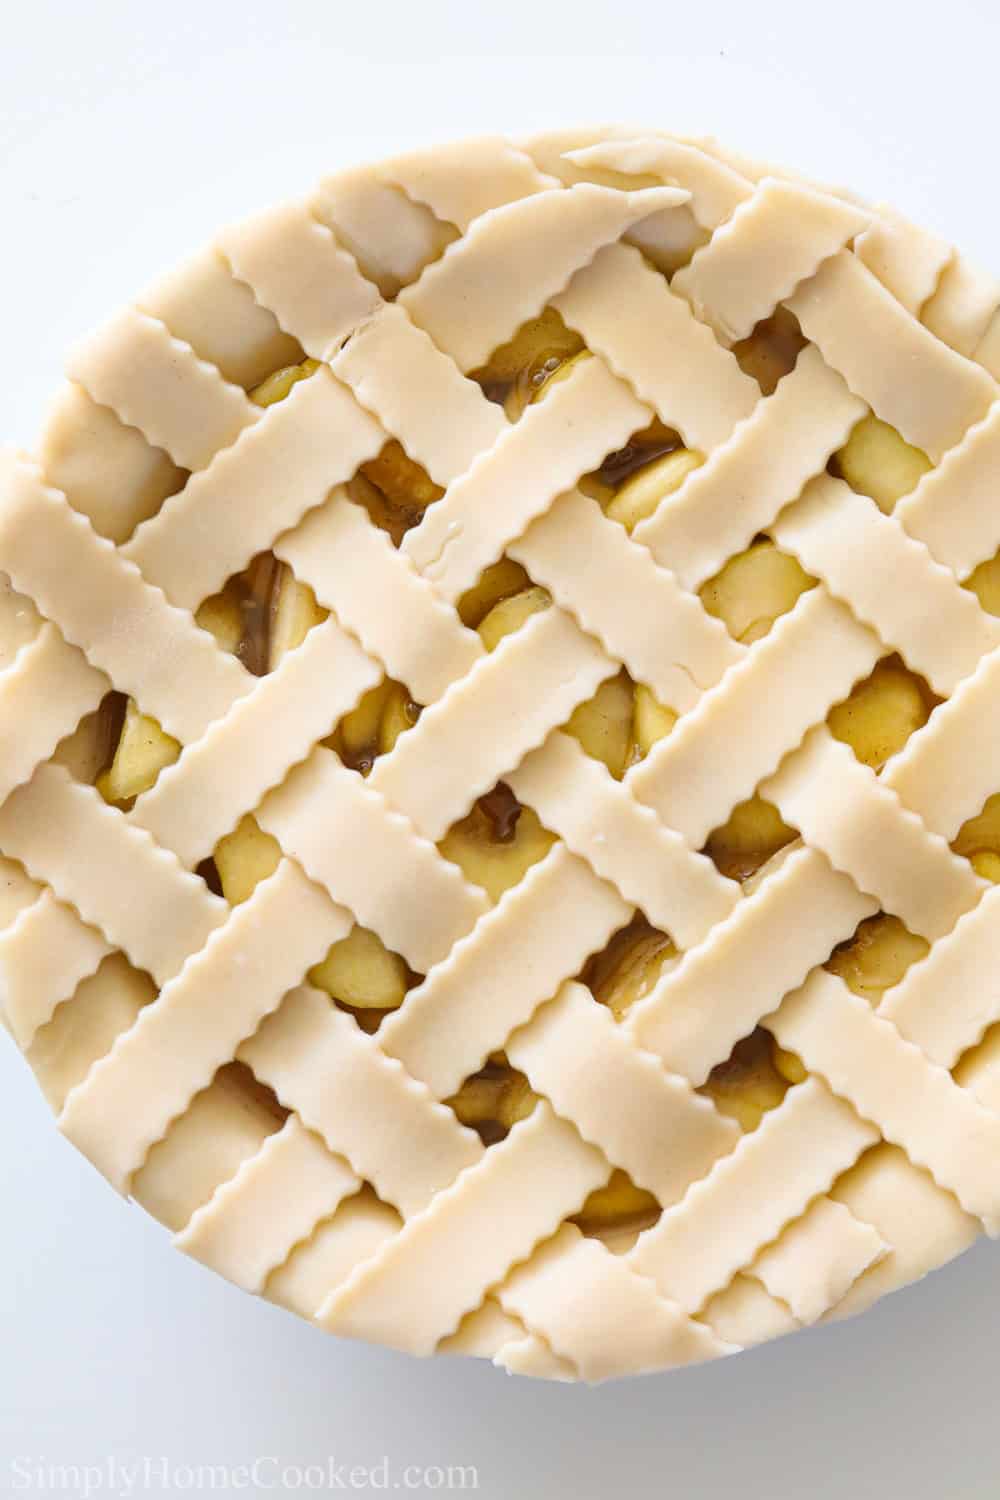 Latticed Homemade Apple Pie with a white background.